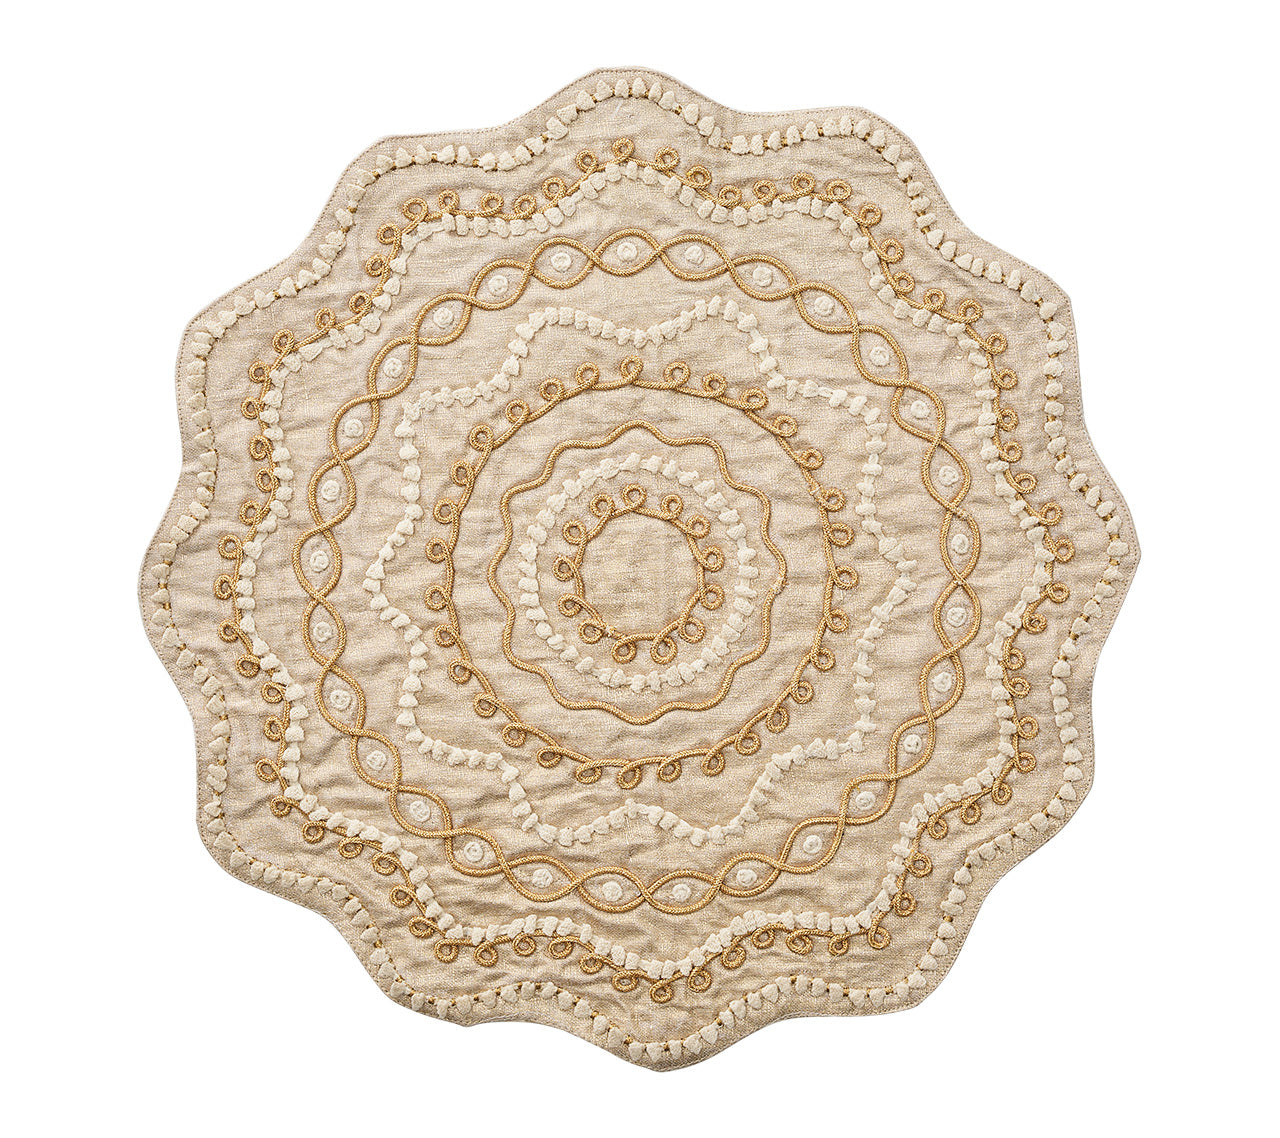 Artisanal Placemat in Natural & Gold